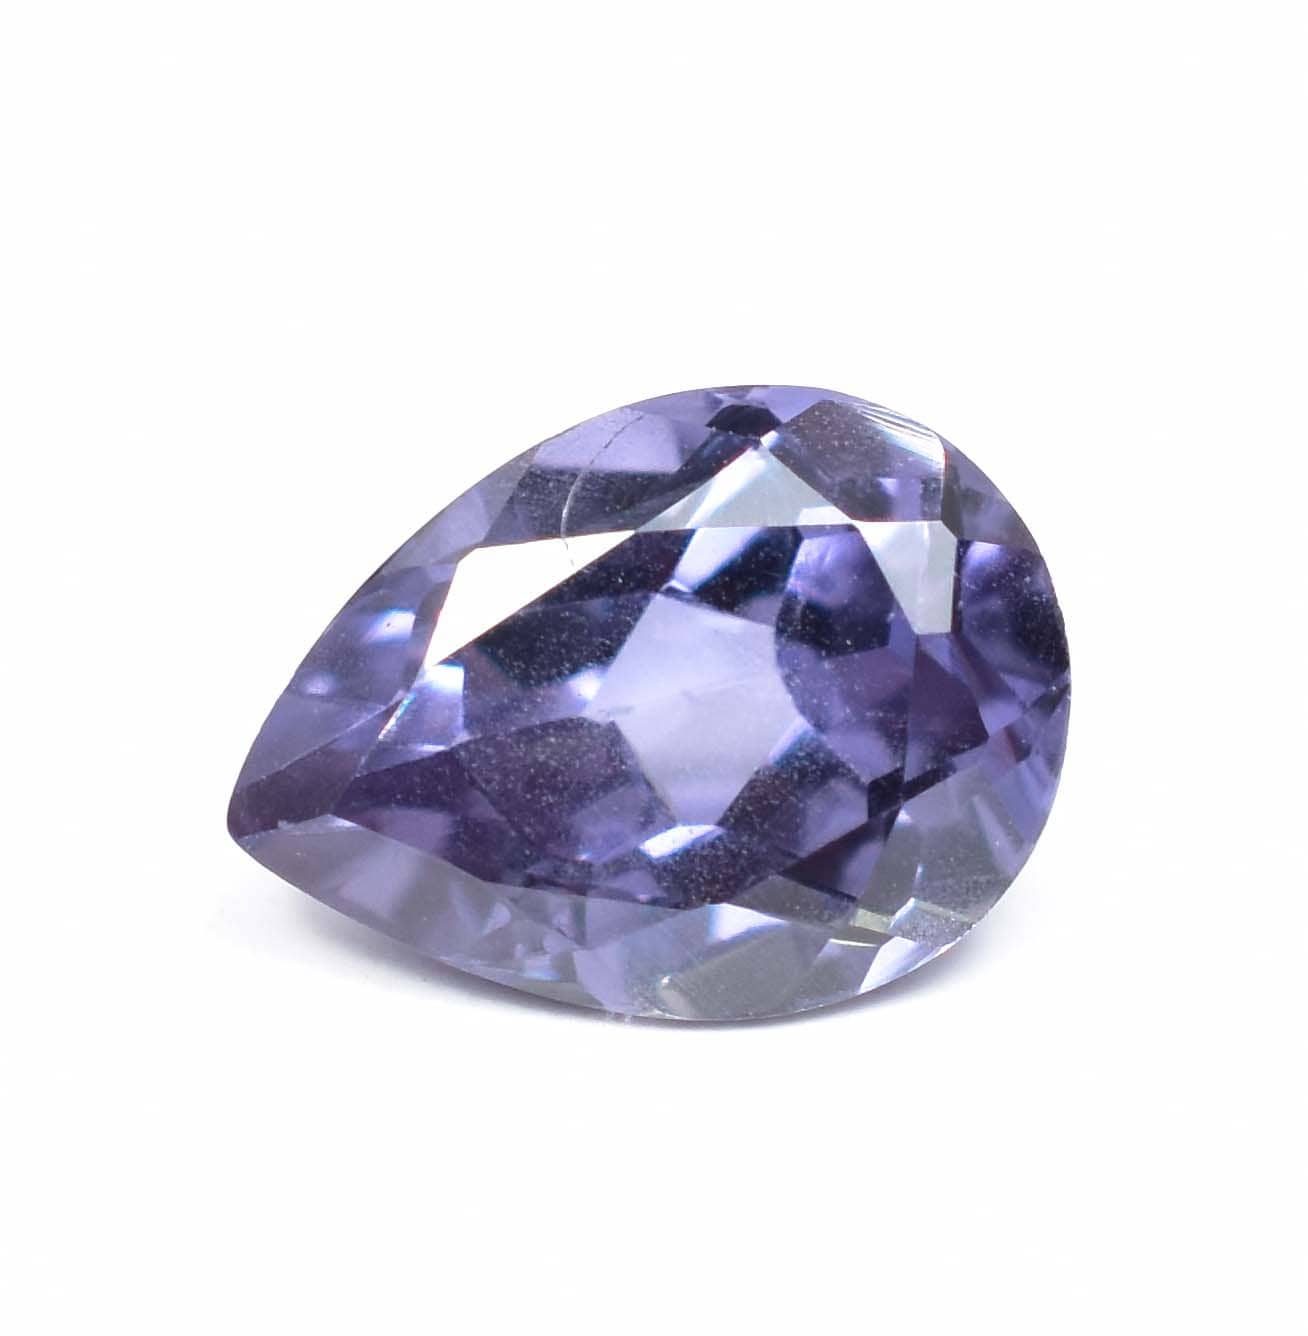 Extremely Rare Natural Ceylon Musgravite 2.40 Ct Grey-Purple Round Shape AGL Certified Top Quality Gemstone